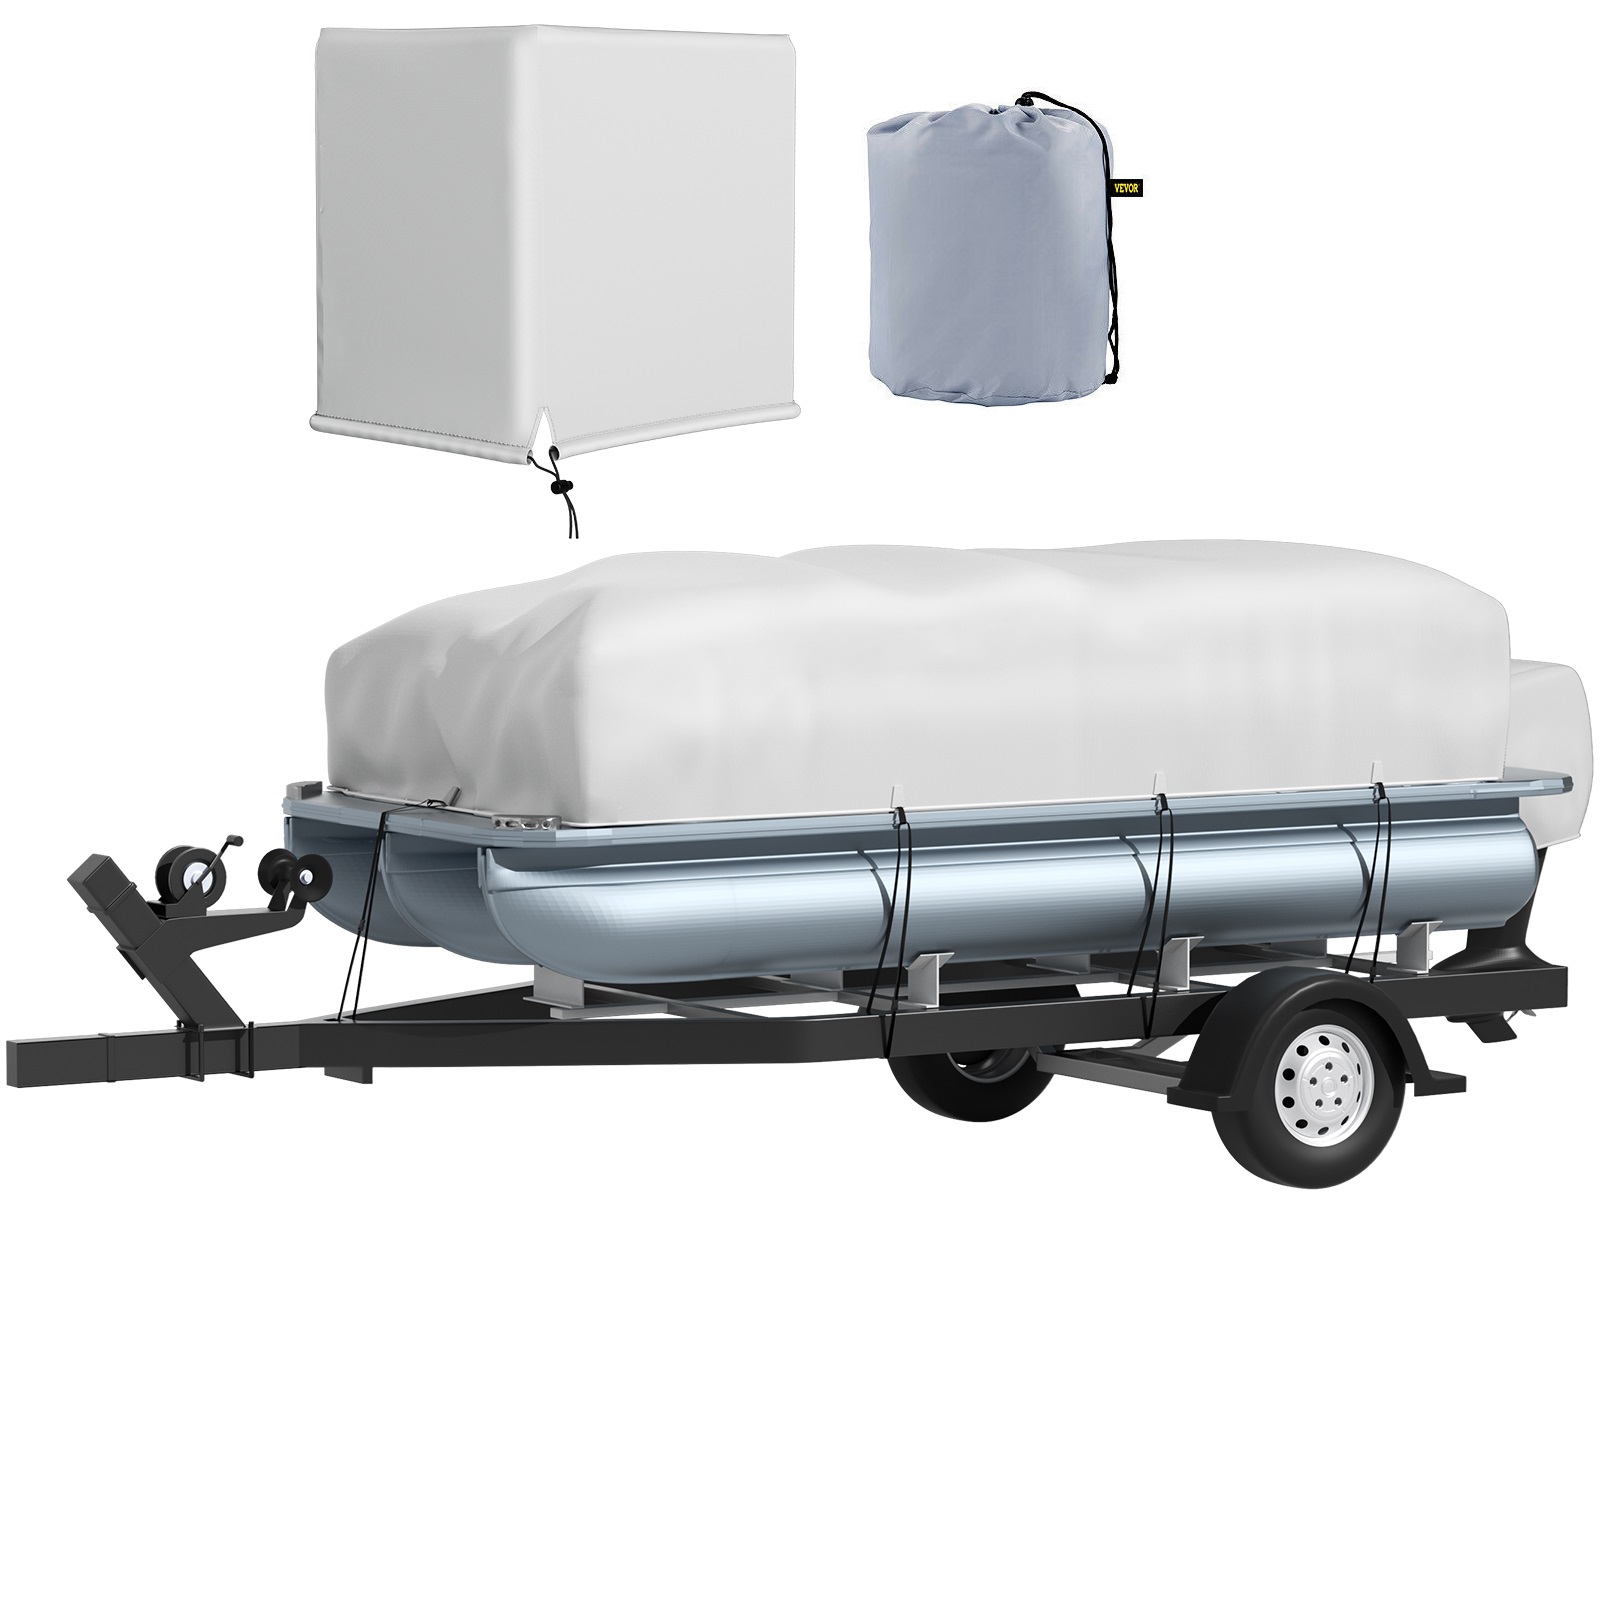 16-18ft V-Hull 210D Boat Cover Waterproof Trailerable Gray